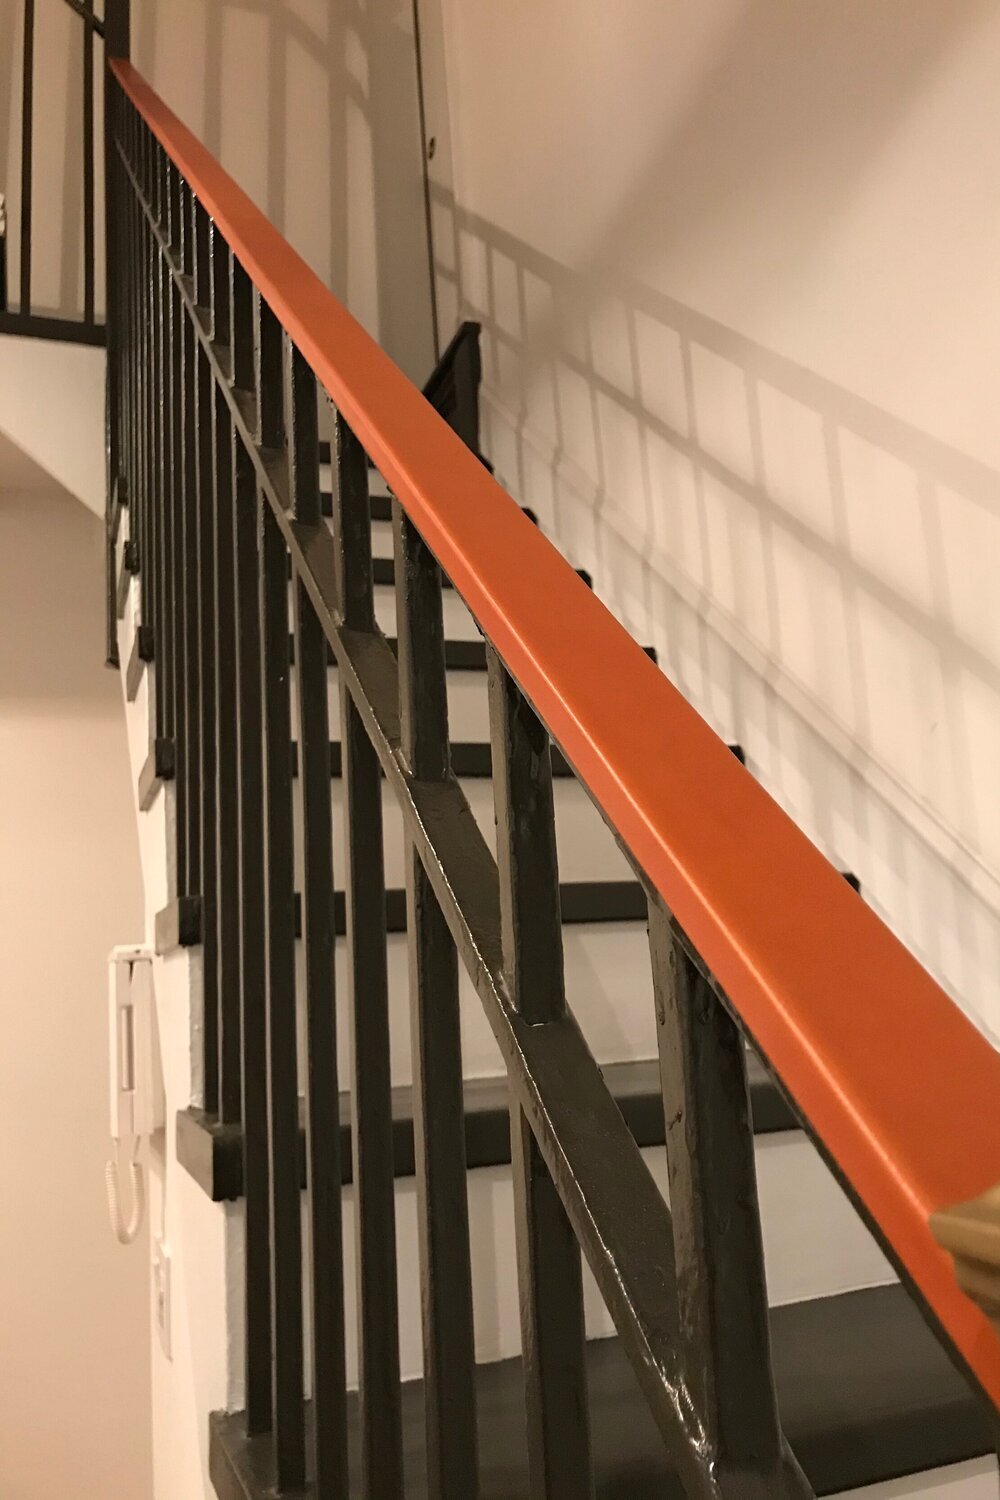 Natural colored leather handrail